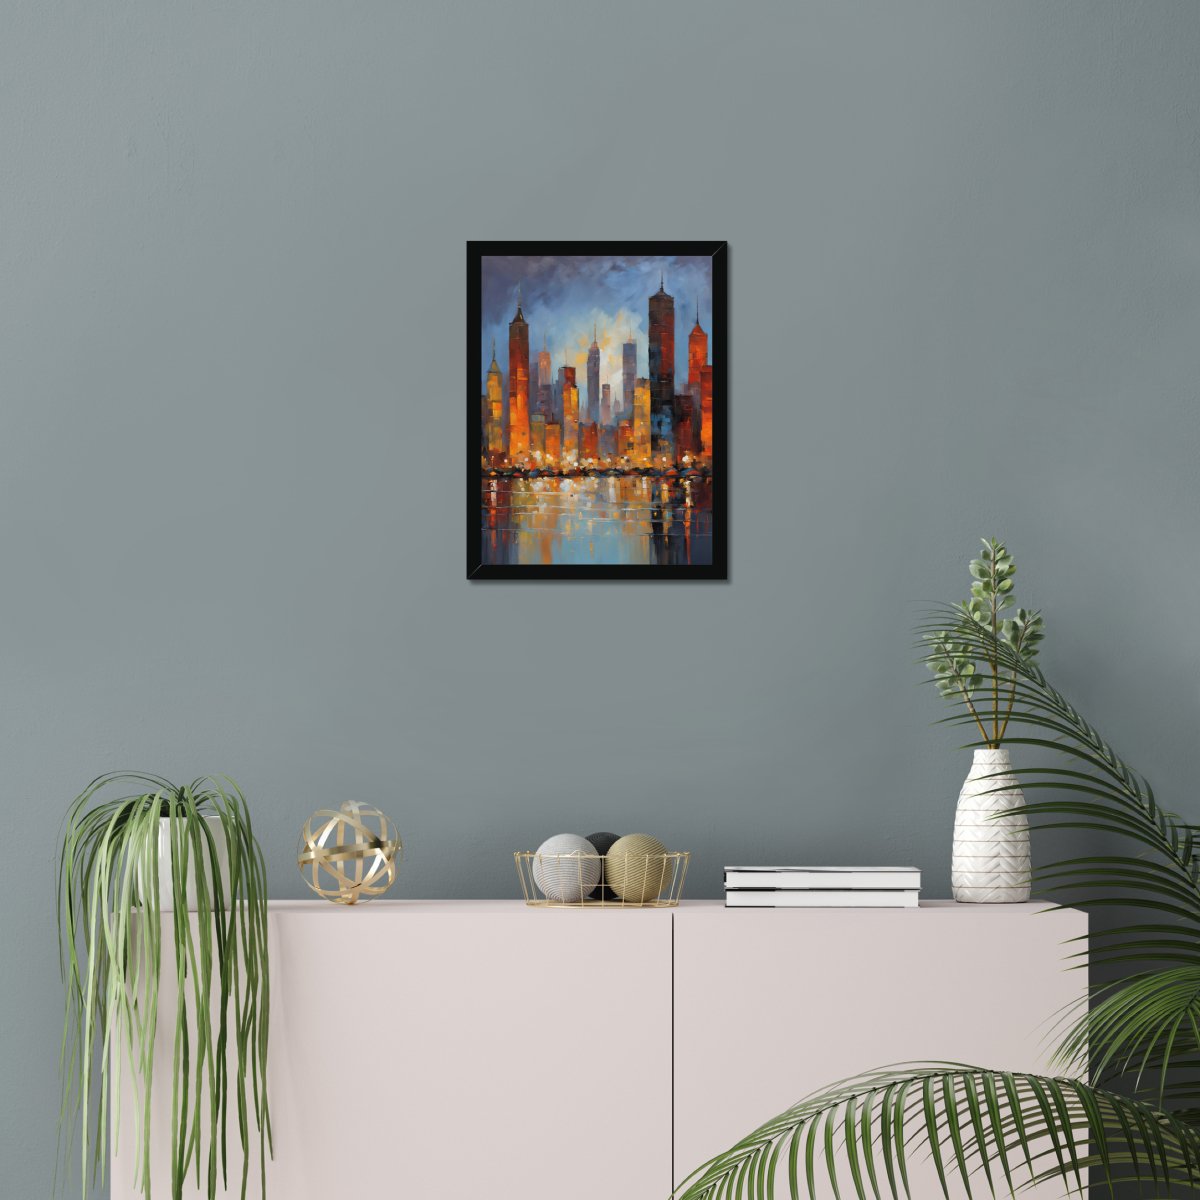 The big apple - Art print - Poster - Ever colorful